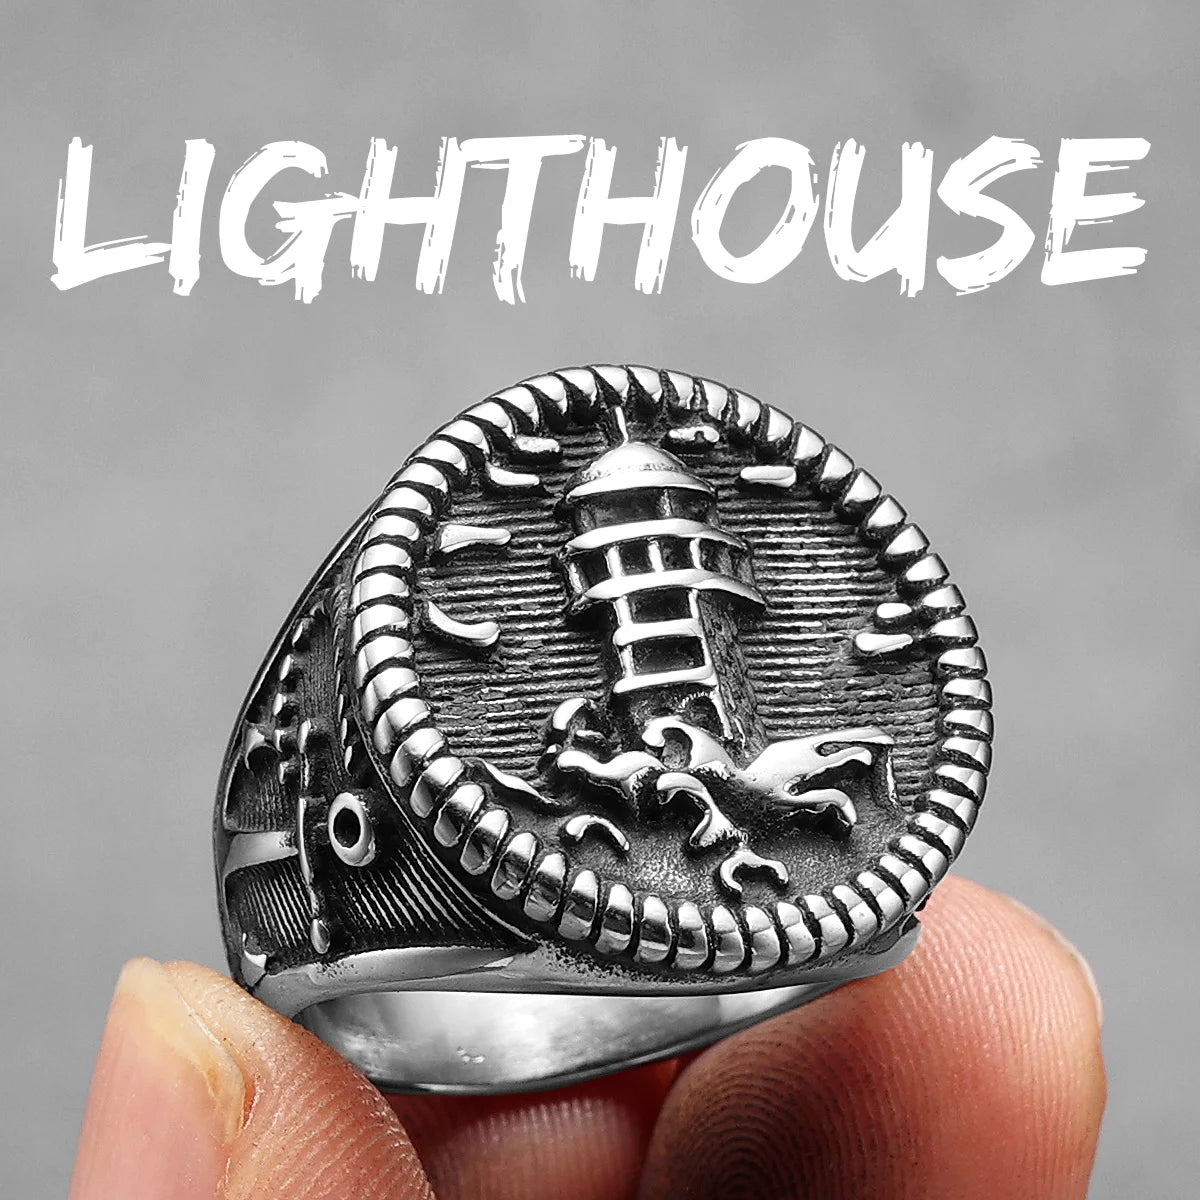 Anchor Lighthouse Ocean Sailor Ship Men Rings Stainless Steel Women Jewelry Vintage Punk Rock Fashion Accessories Gift R1197-Lighthouse